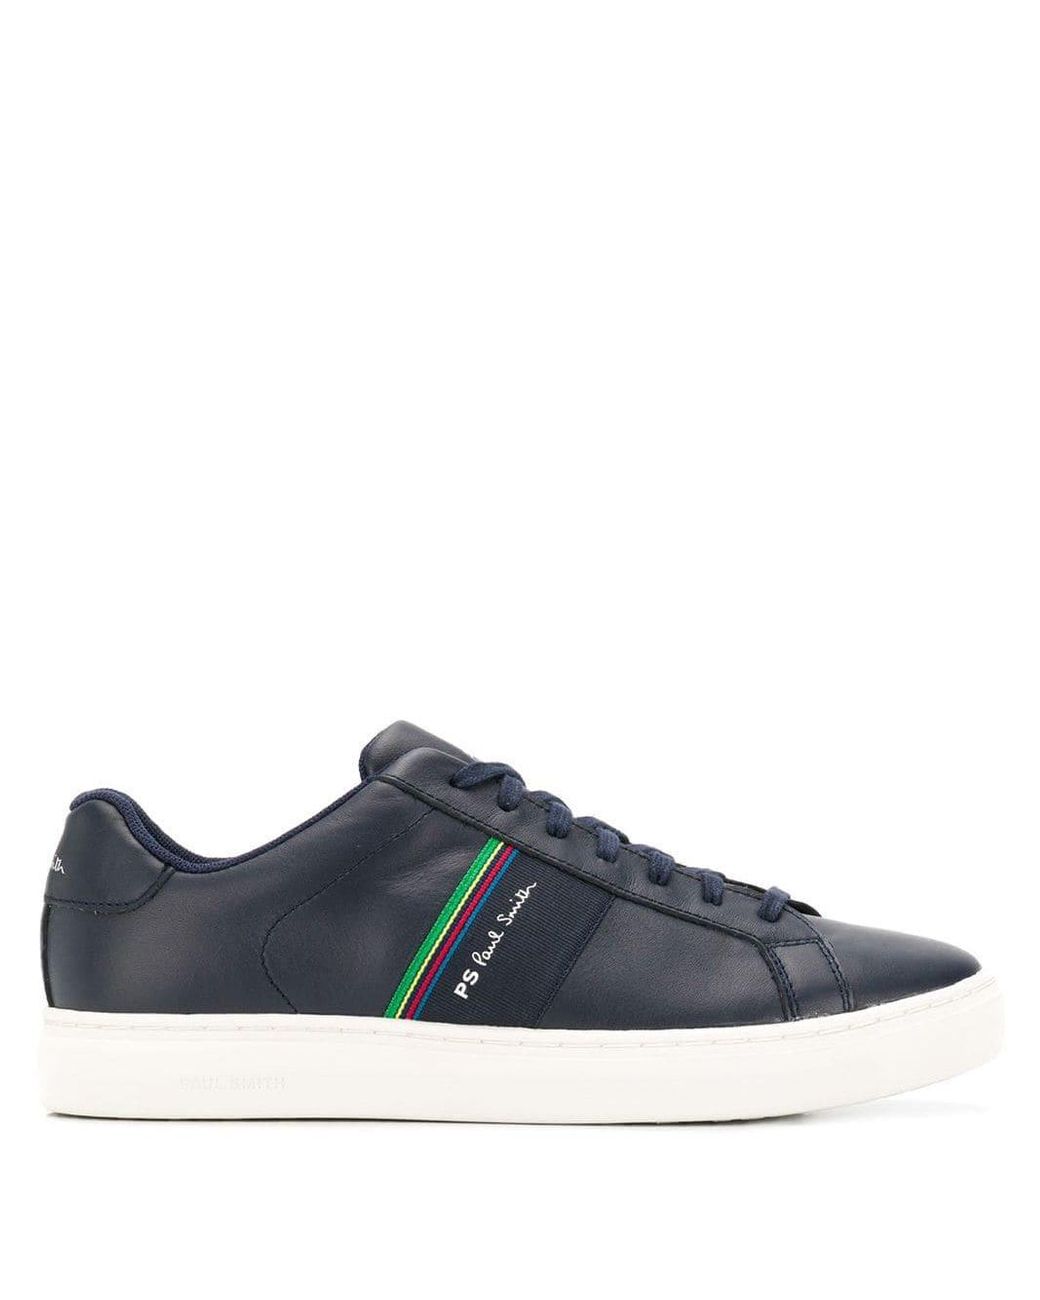 PS by Paul Smith Leather Stripe Lace-up Sneakers in Blue for Men - Lyst